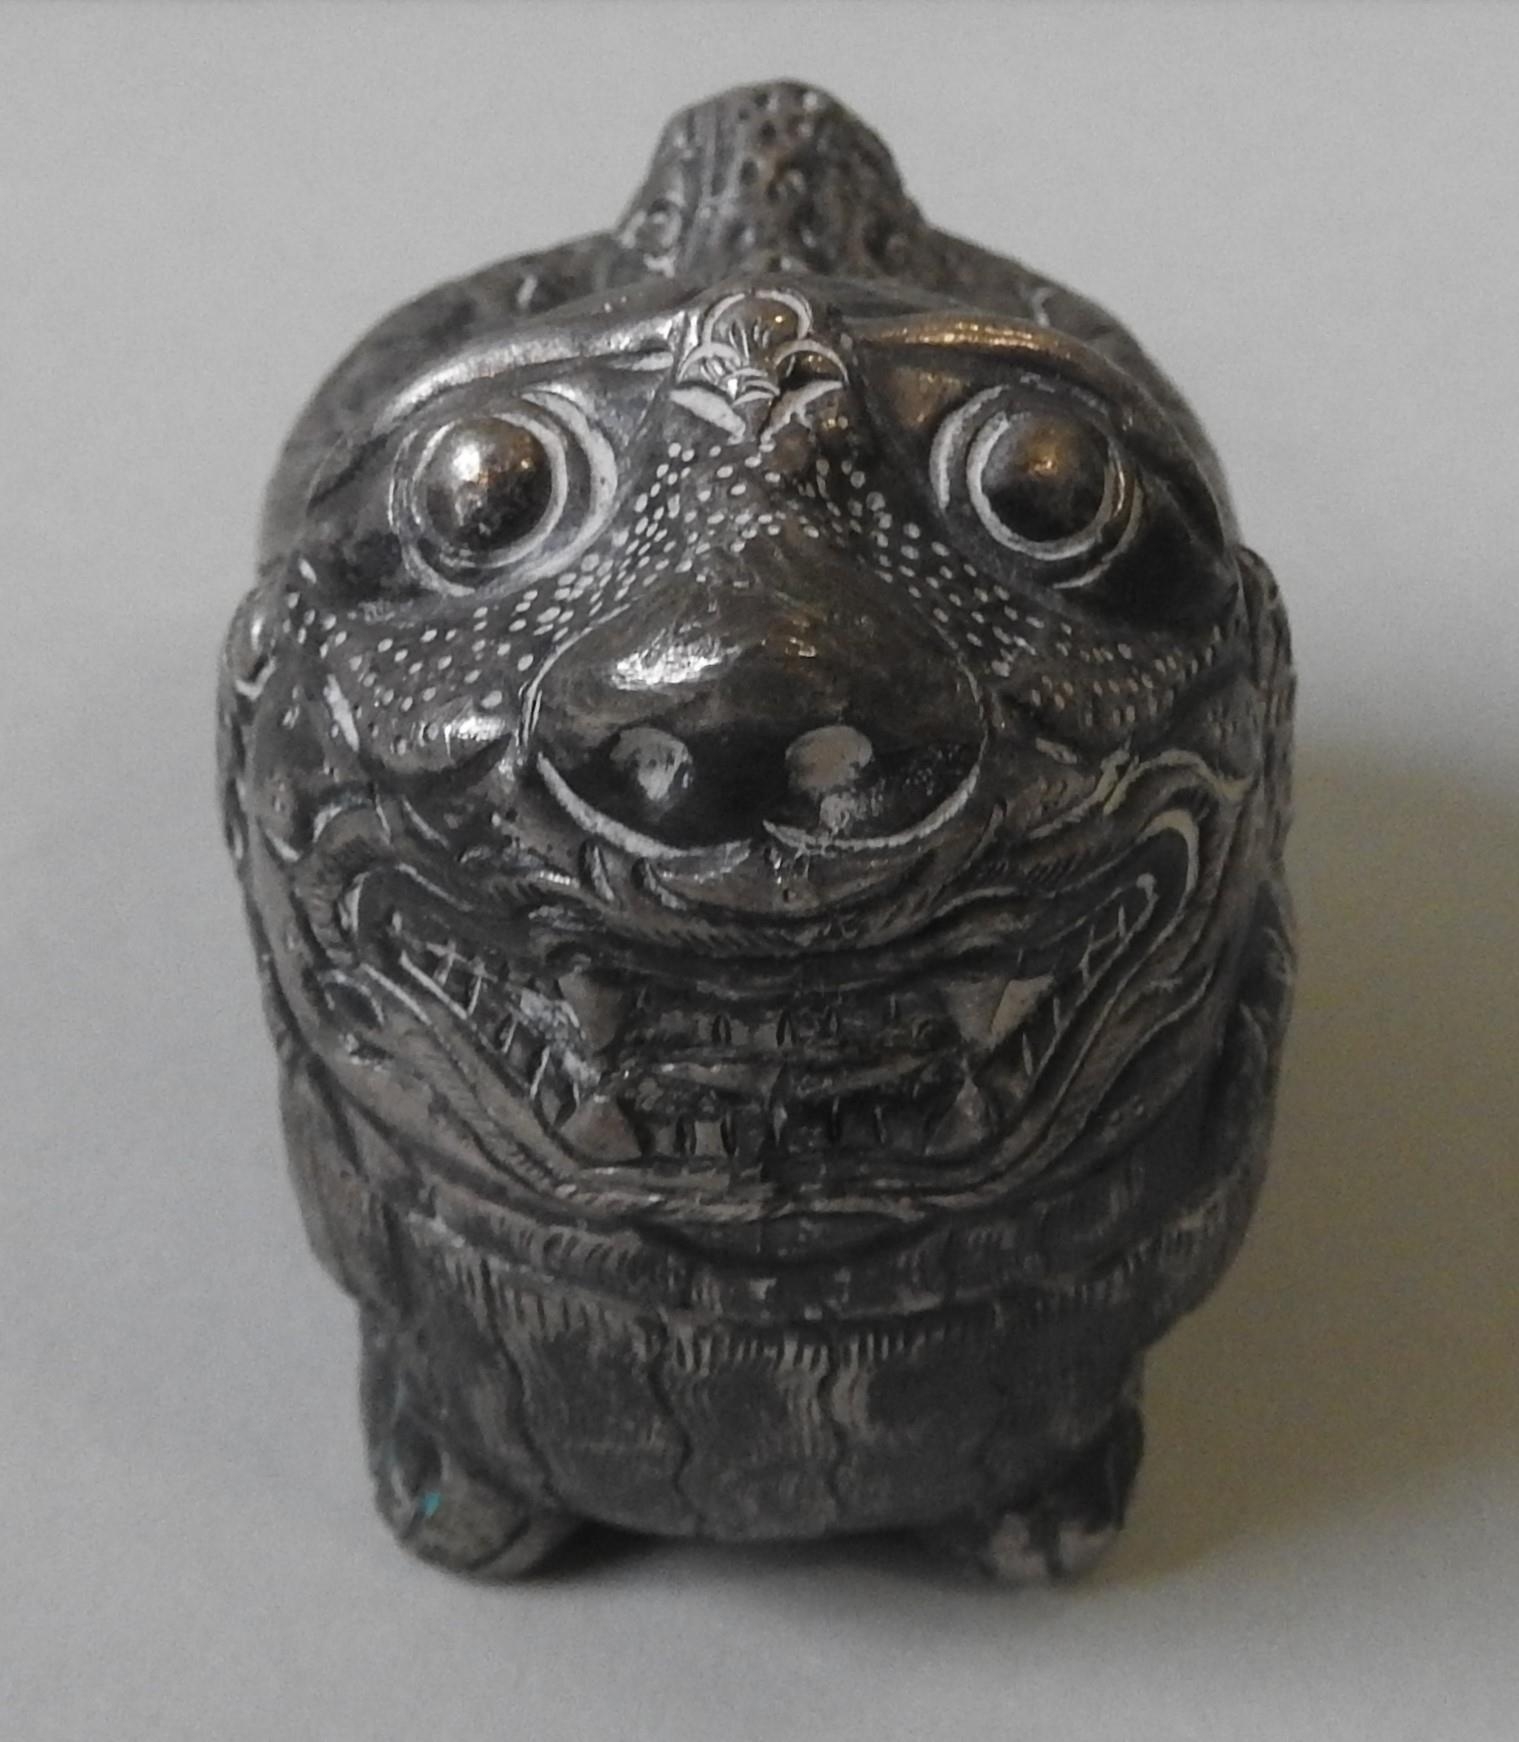 A CAMBODIAN SILVER BETEL BOX, in the form of a foo dog, early 20th century, 7cm high x 8 cm long - Image 2 of 4